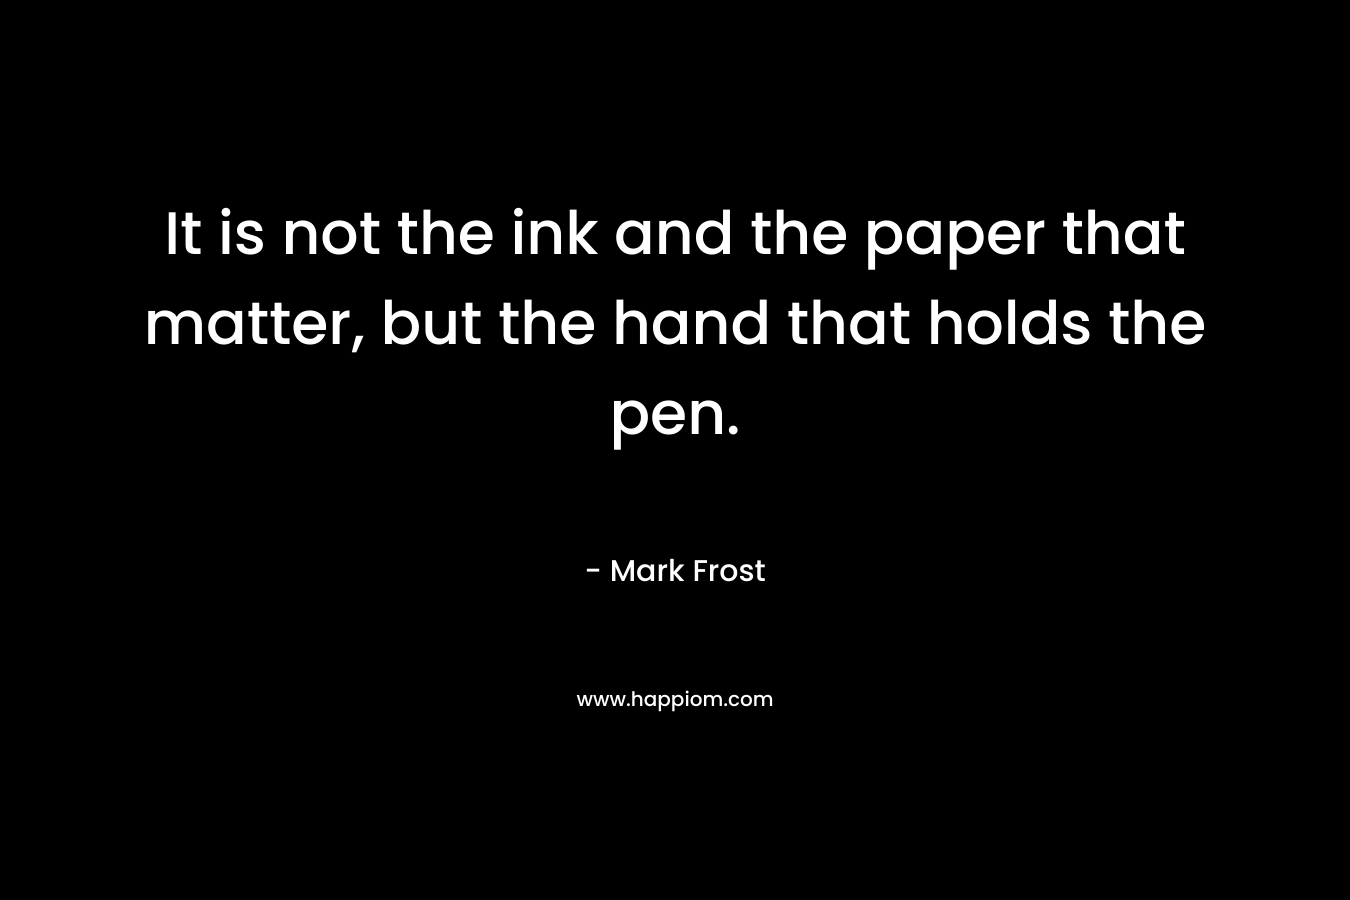 It is not the ink and the paper that matter, but the hand that holds the pen. – Mark Frost